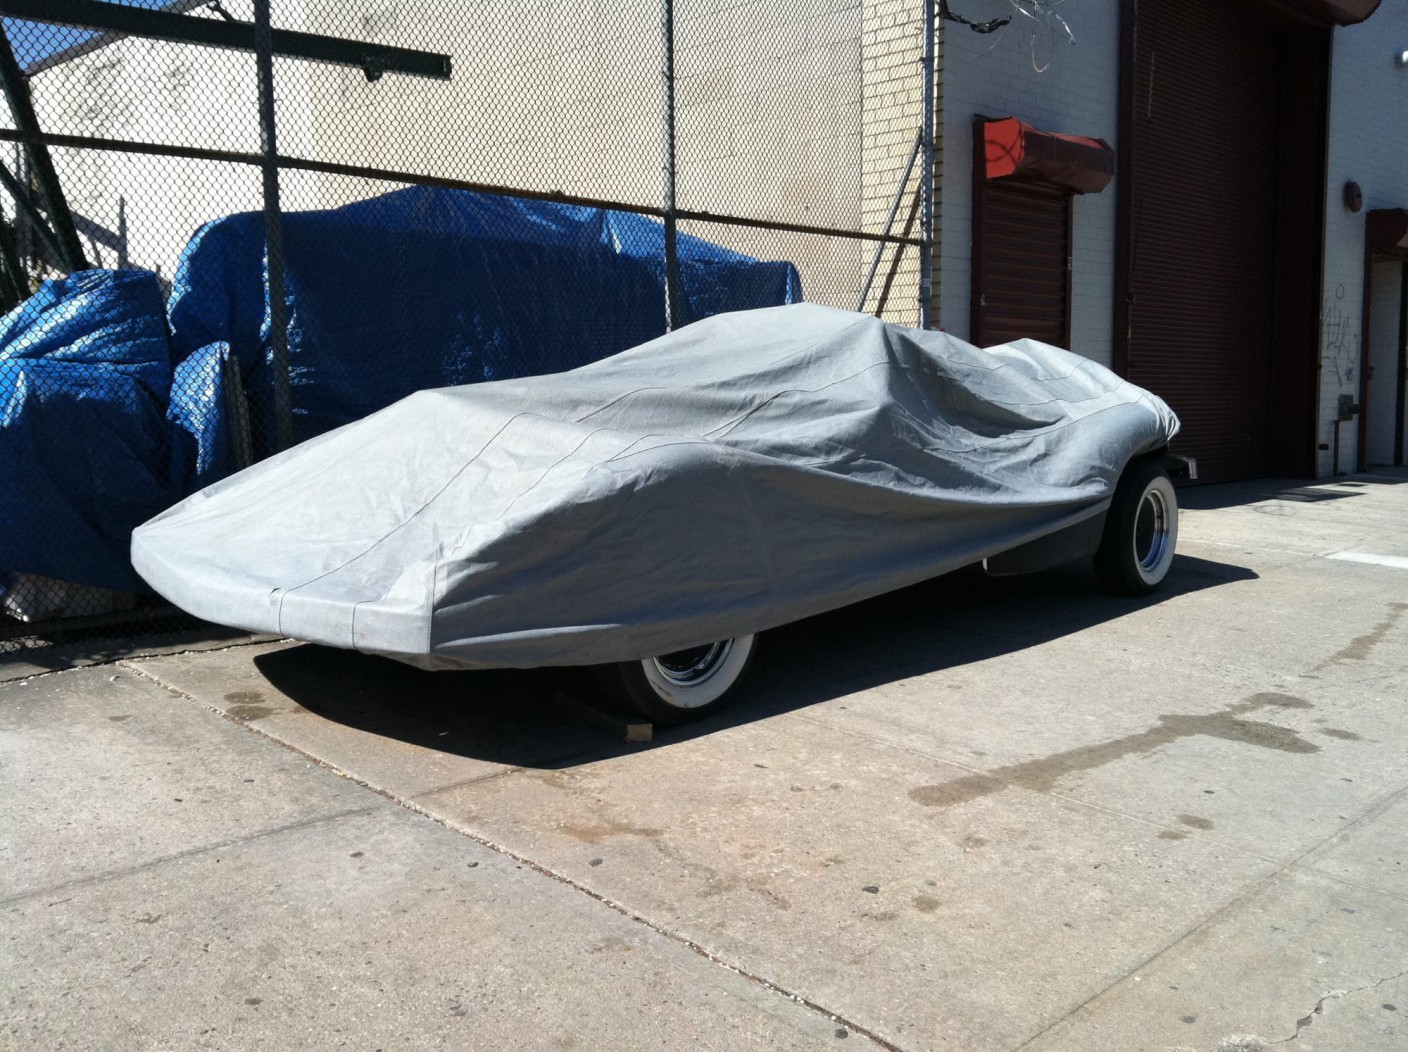 An old sports car covered with a tarp